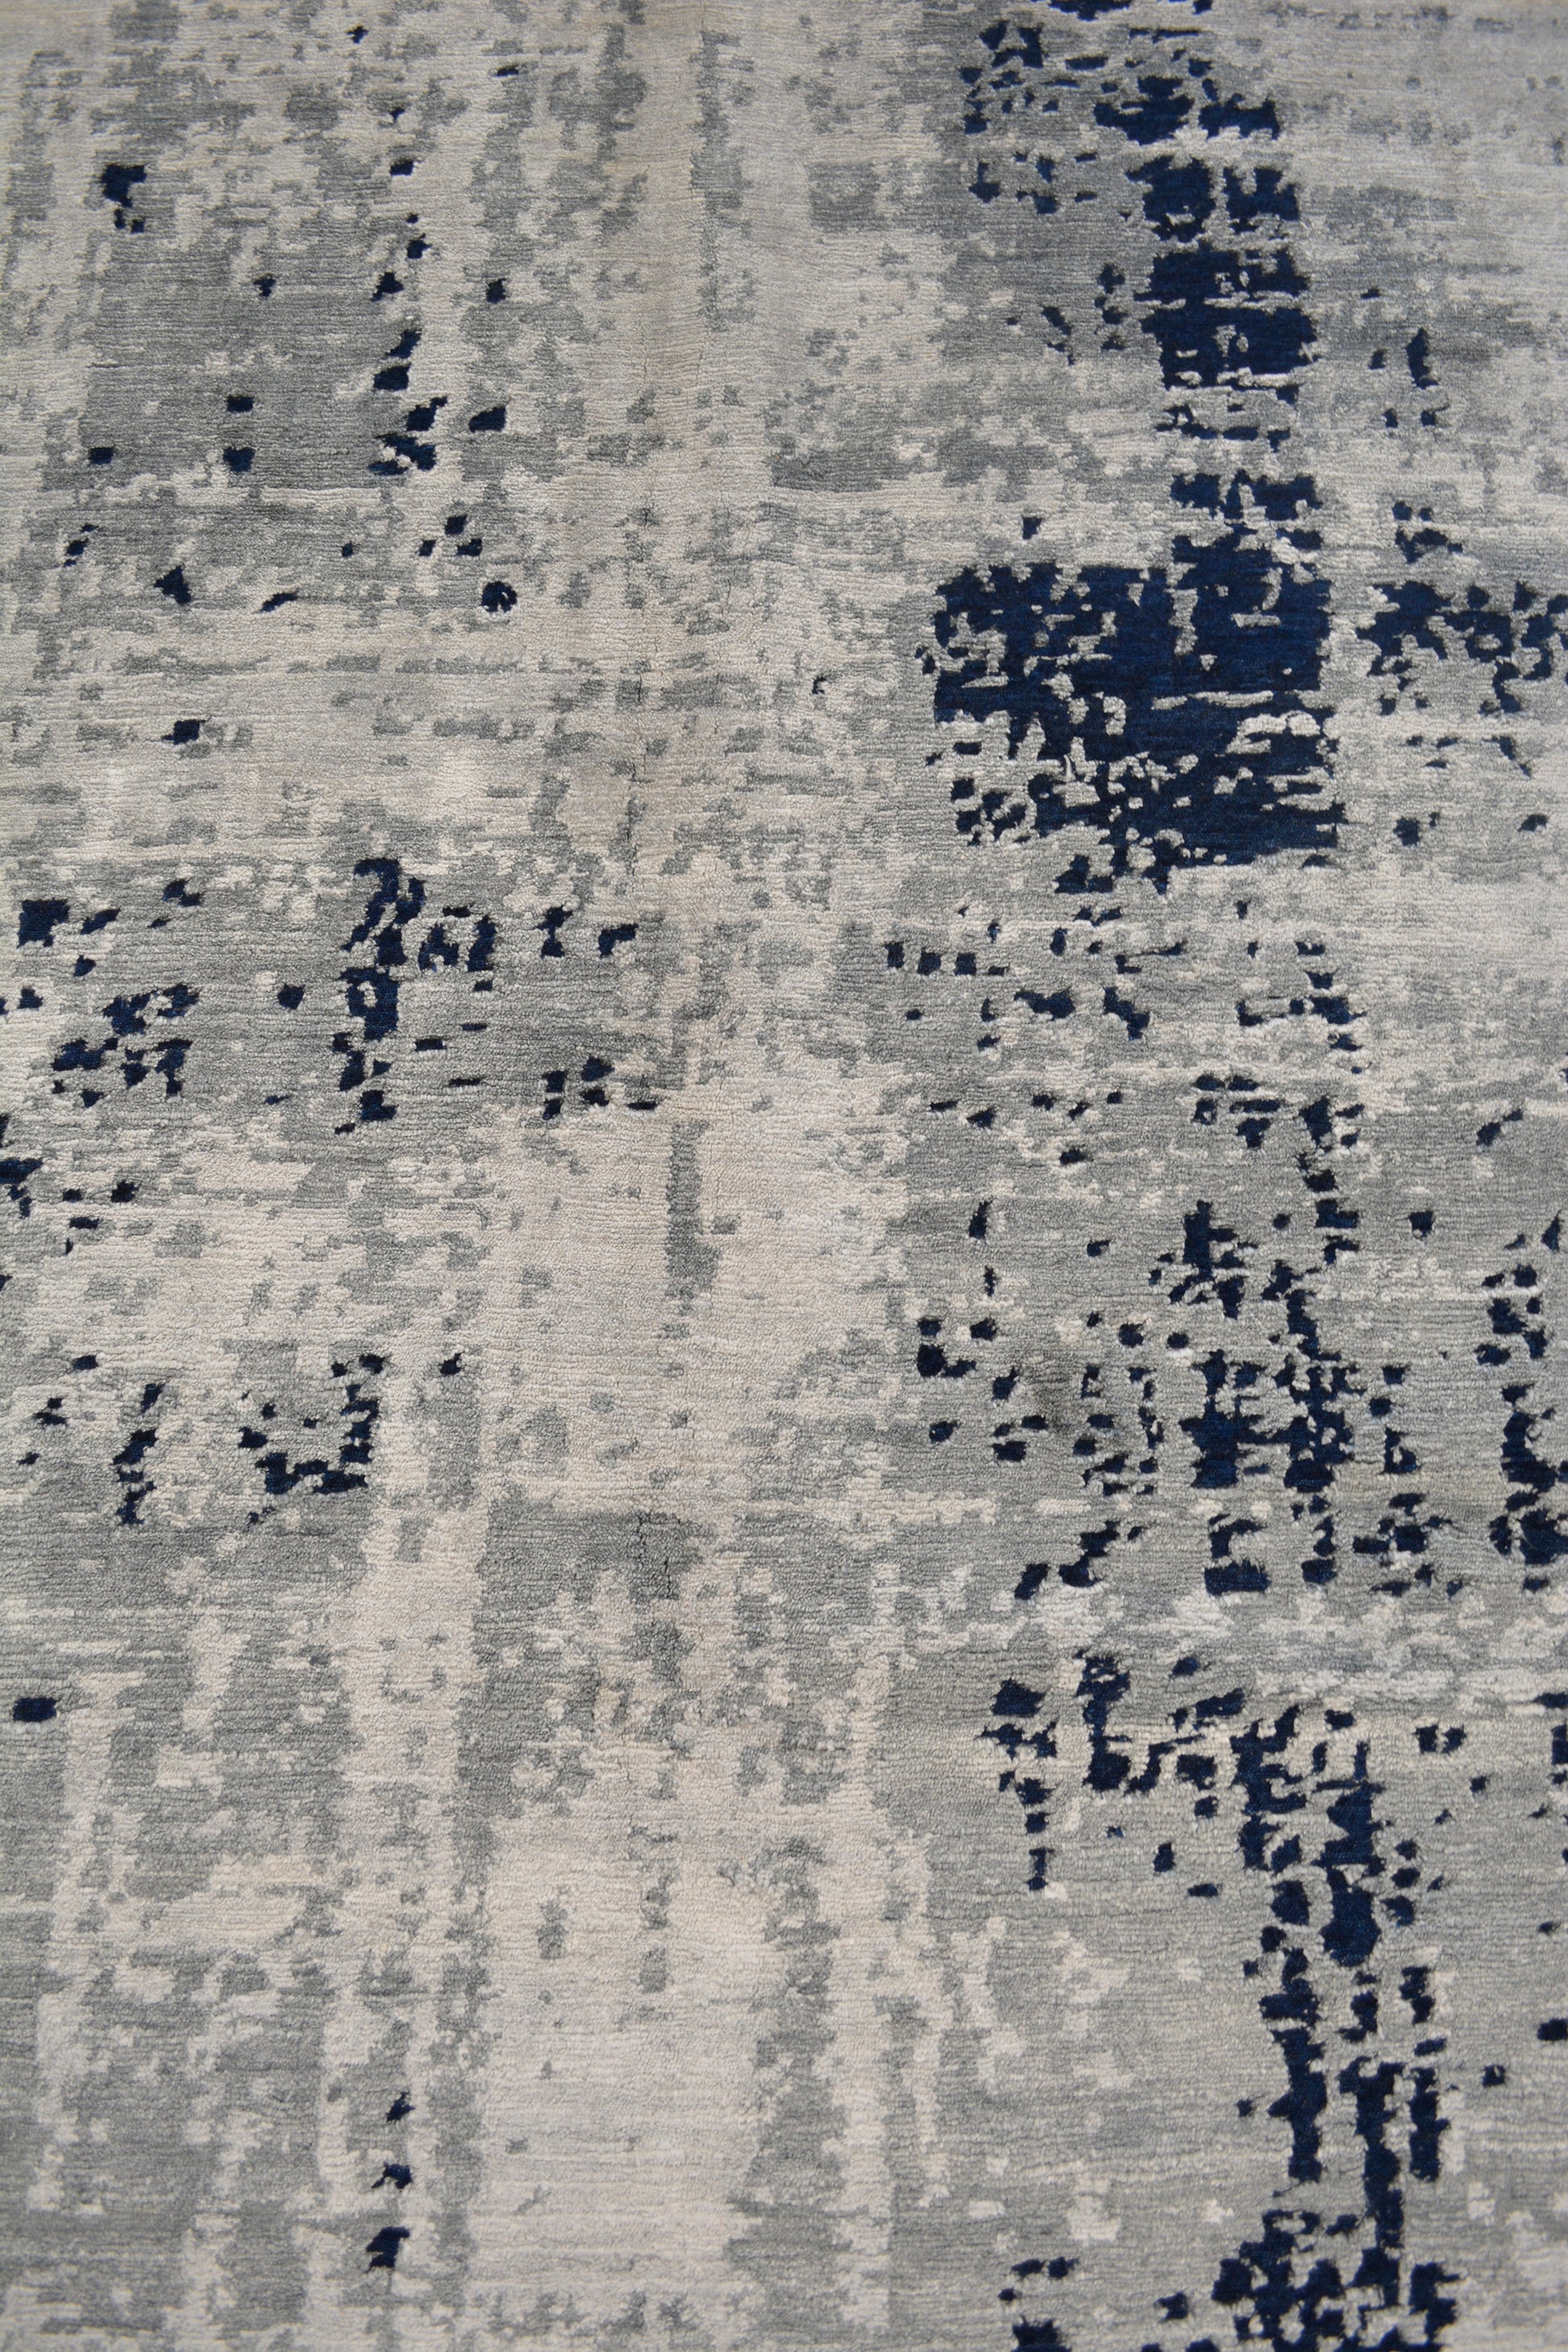 The center's close-up shows the great texture of the finish of this rug.